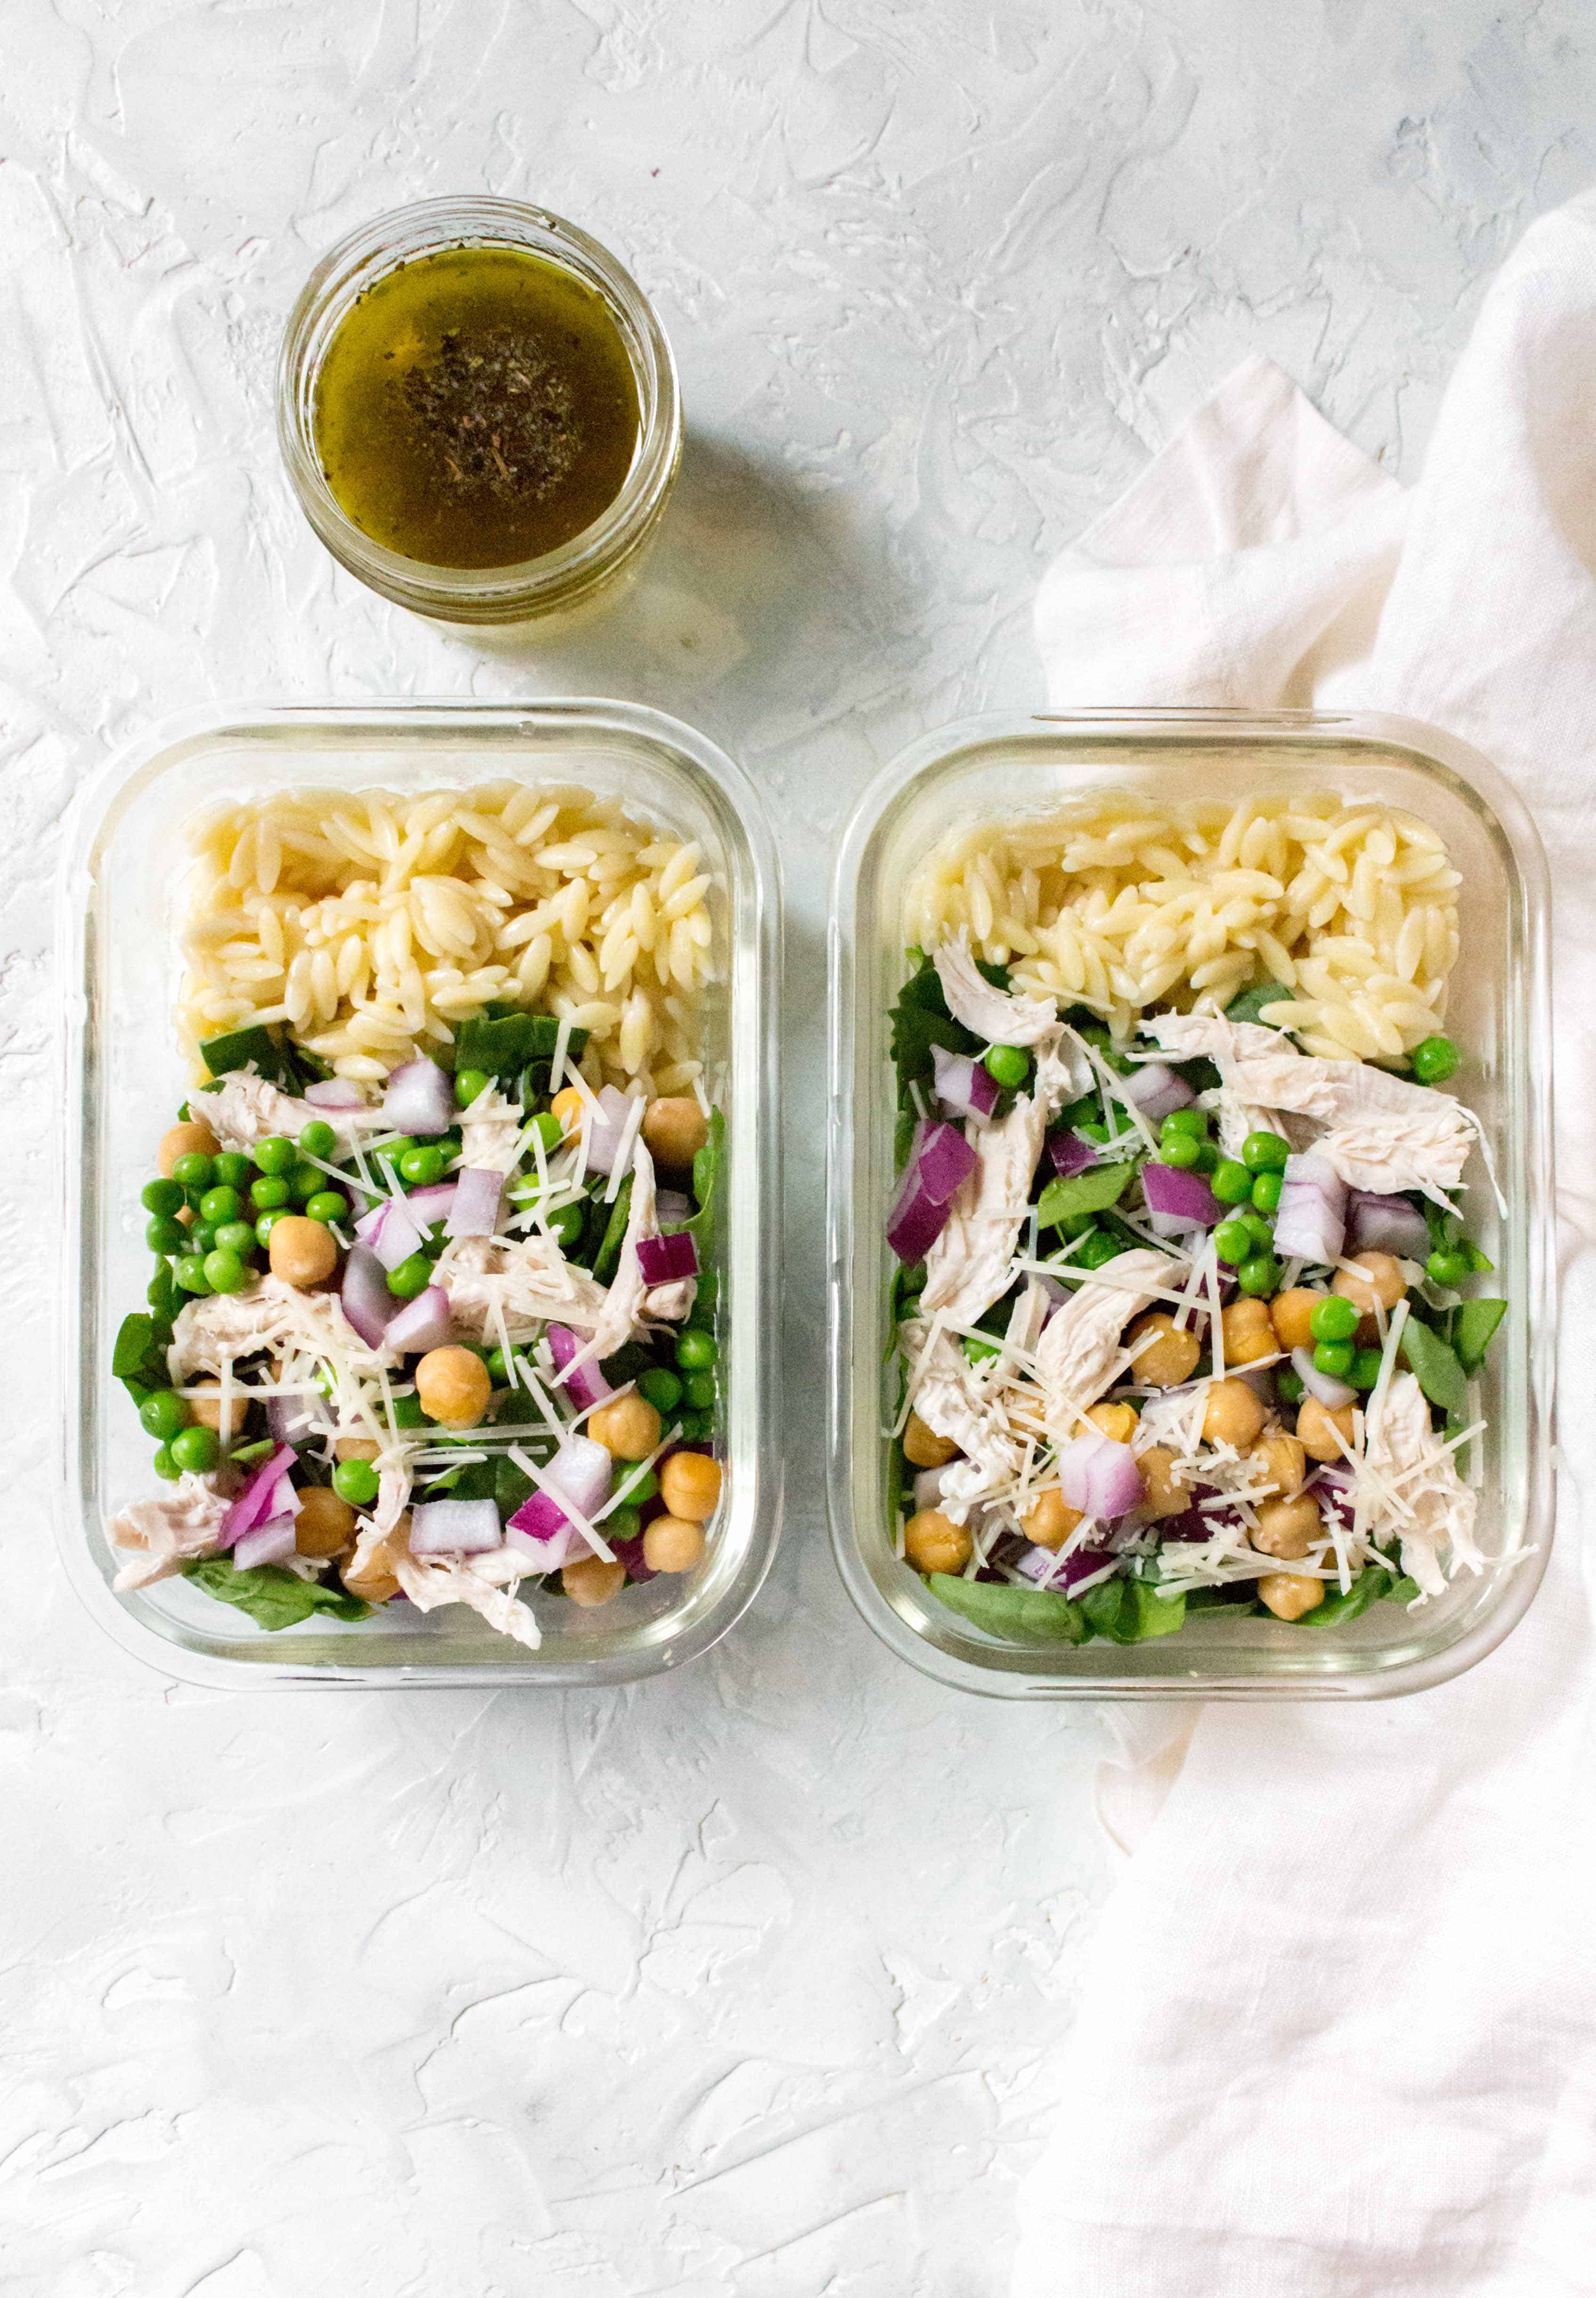 Salads don't have to be boring! Here's a delicious and hearty Orzo Salad Meal Prep for you to try this week! This orzo meal prep is the perfect cold work lunch as its filling and packed with healthy goodness!